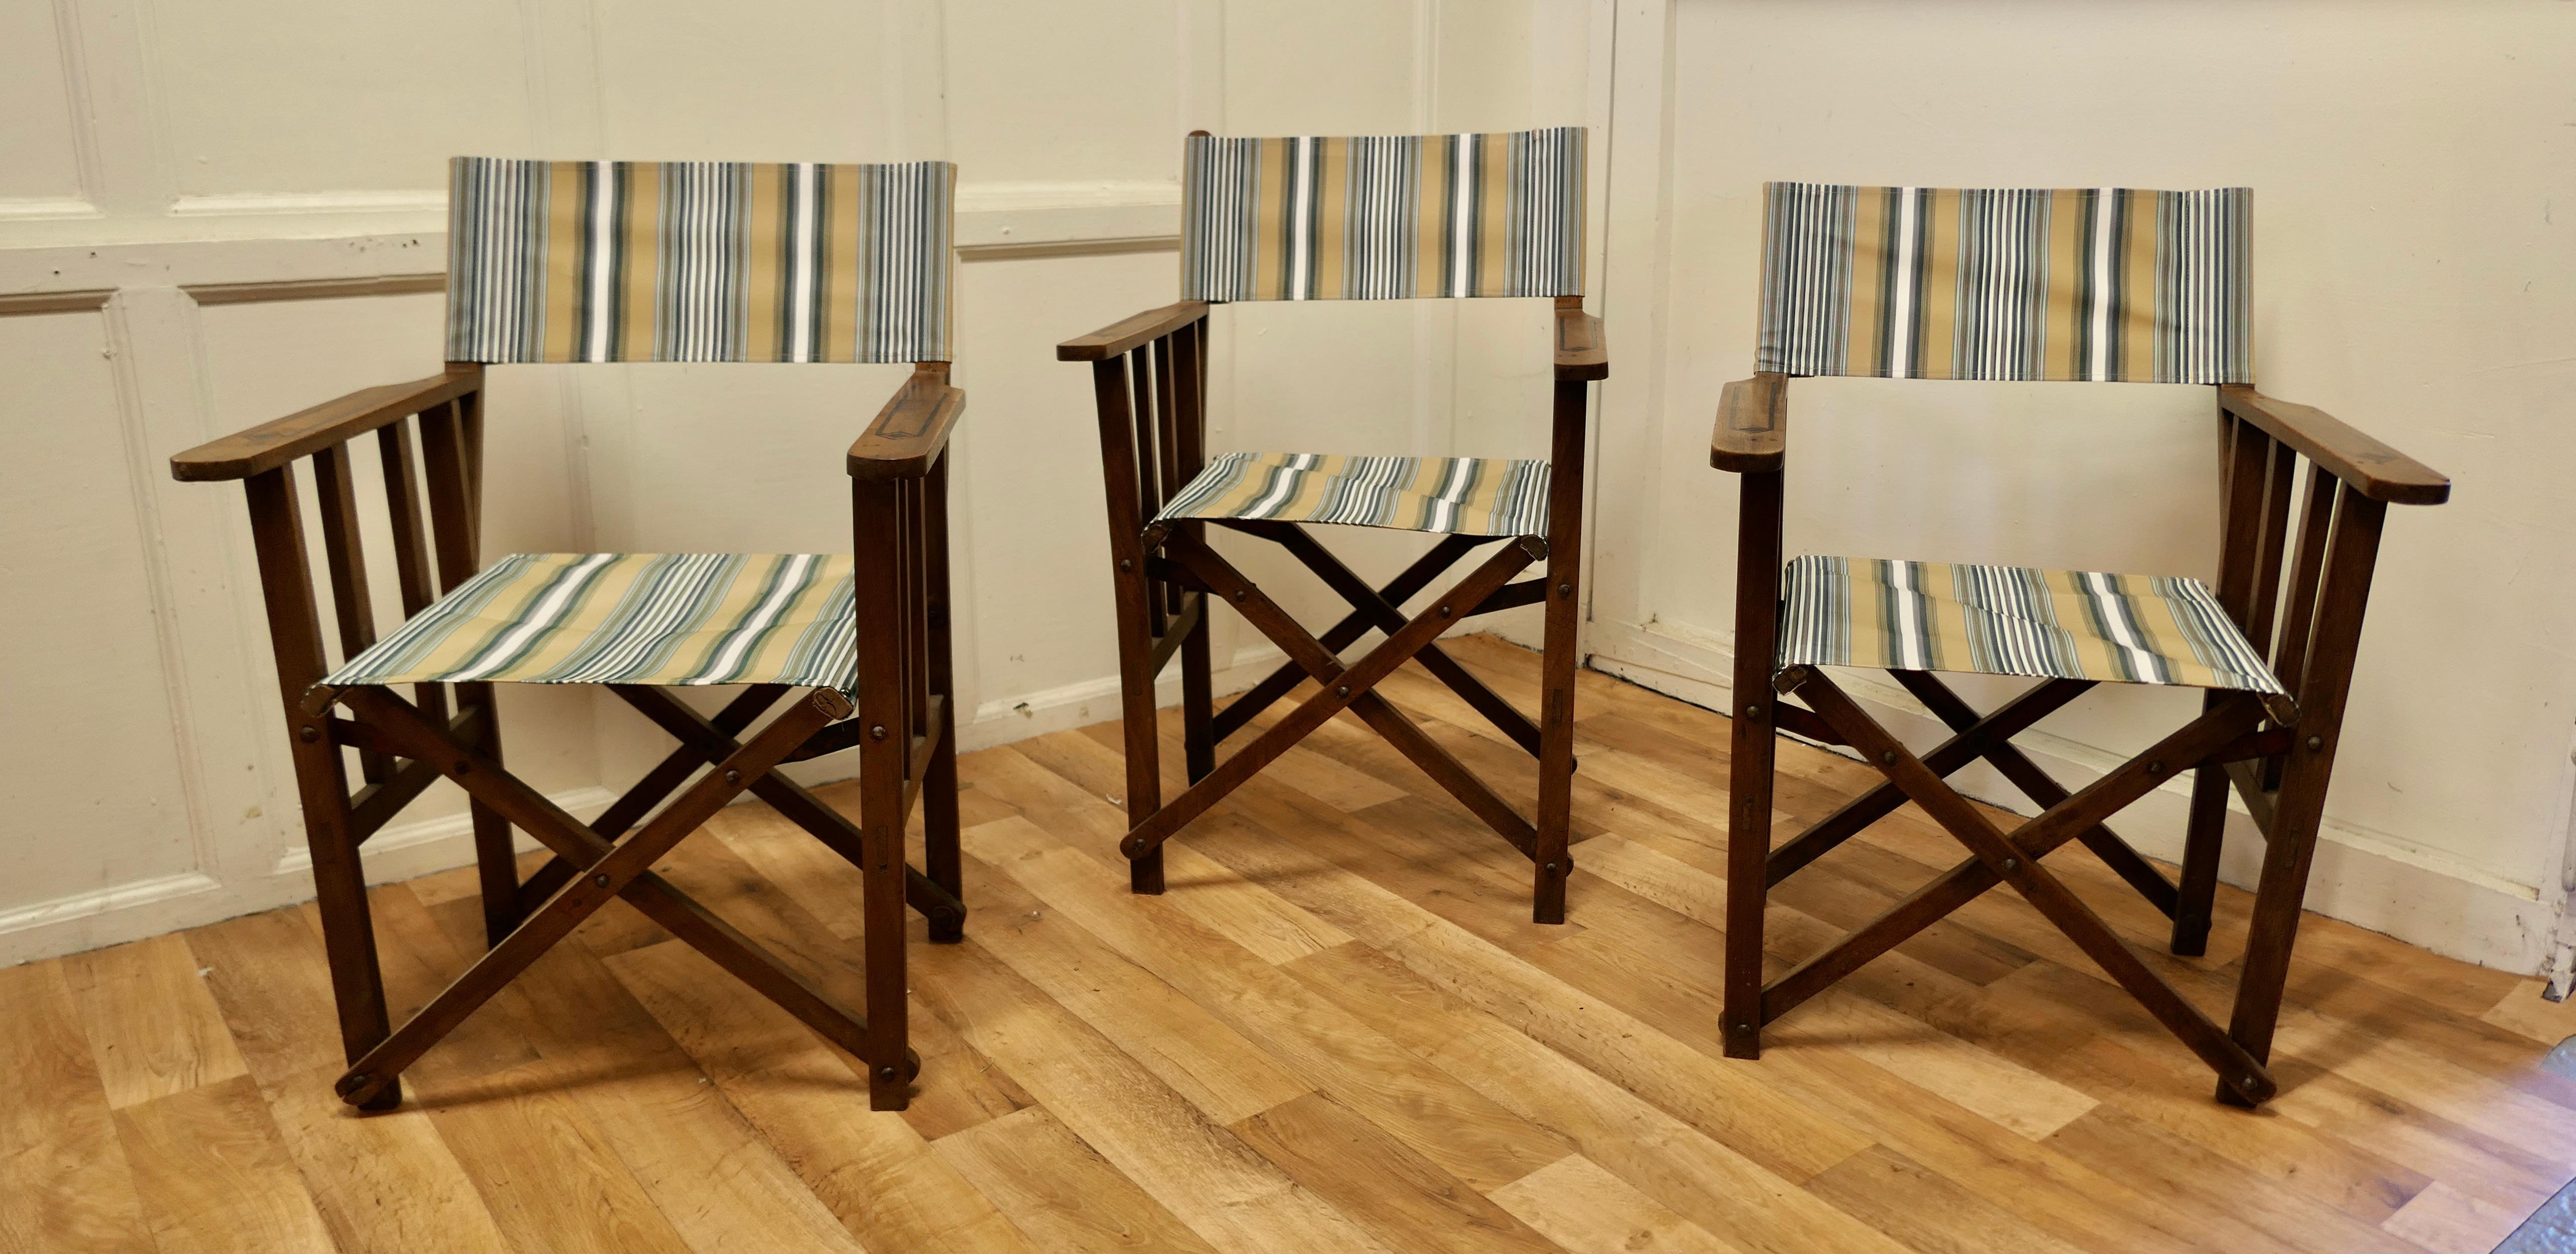 Set of 3  Edwardian Canvas Directors Chairs, Loft and Garden Style Chairs


A great set of lounging chairs, these would work very well both indoor and out, the chairs are made in beech with broad arm rests, and new heavy canvas upholstery
The chairs